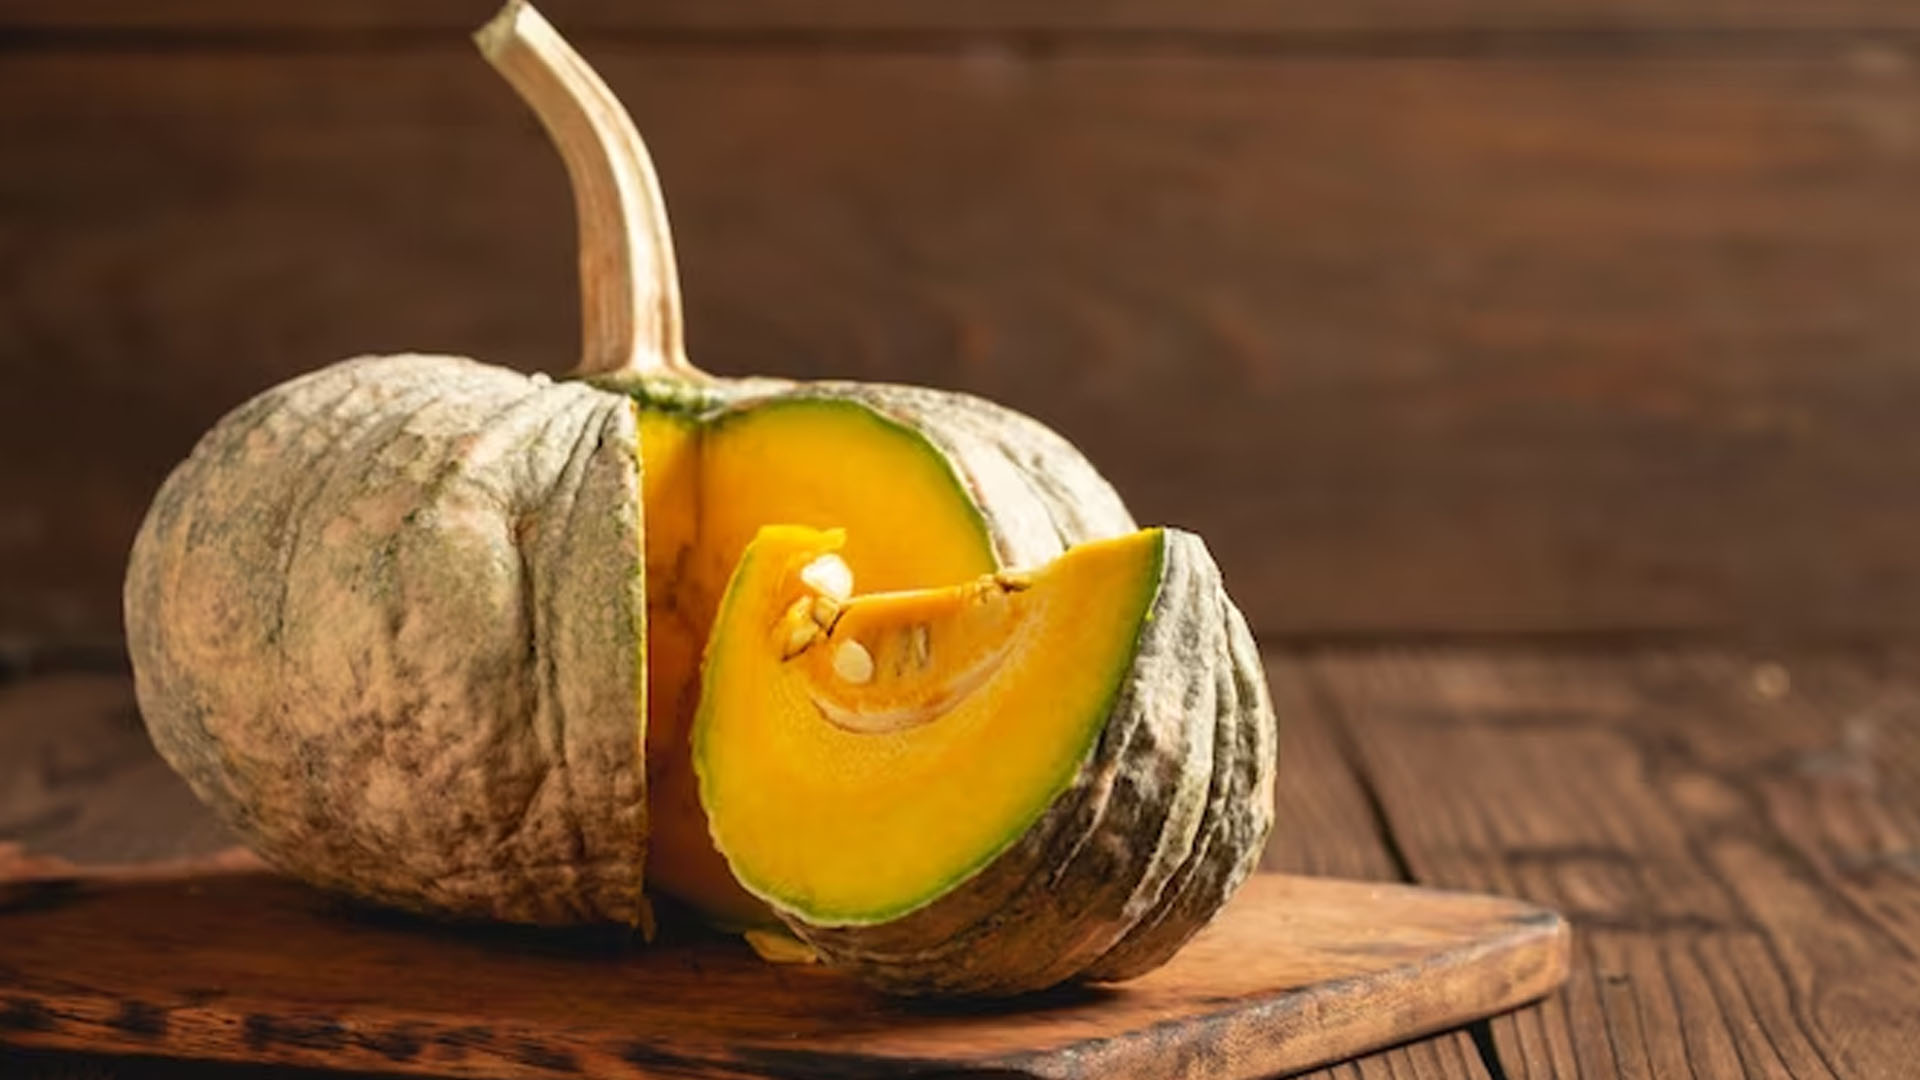 What Are The Health Benefits of Eating Winter Squash?